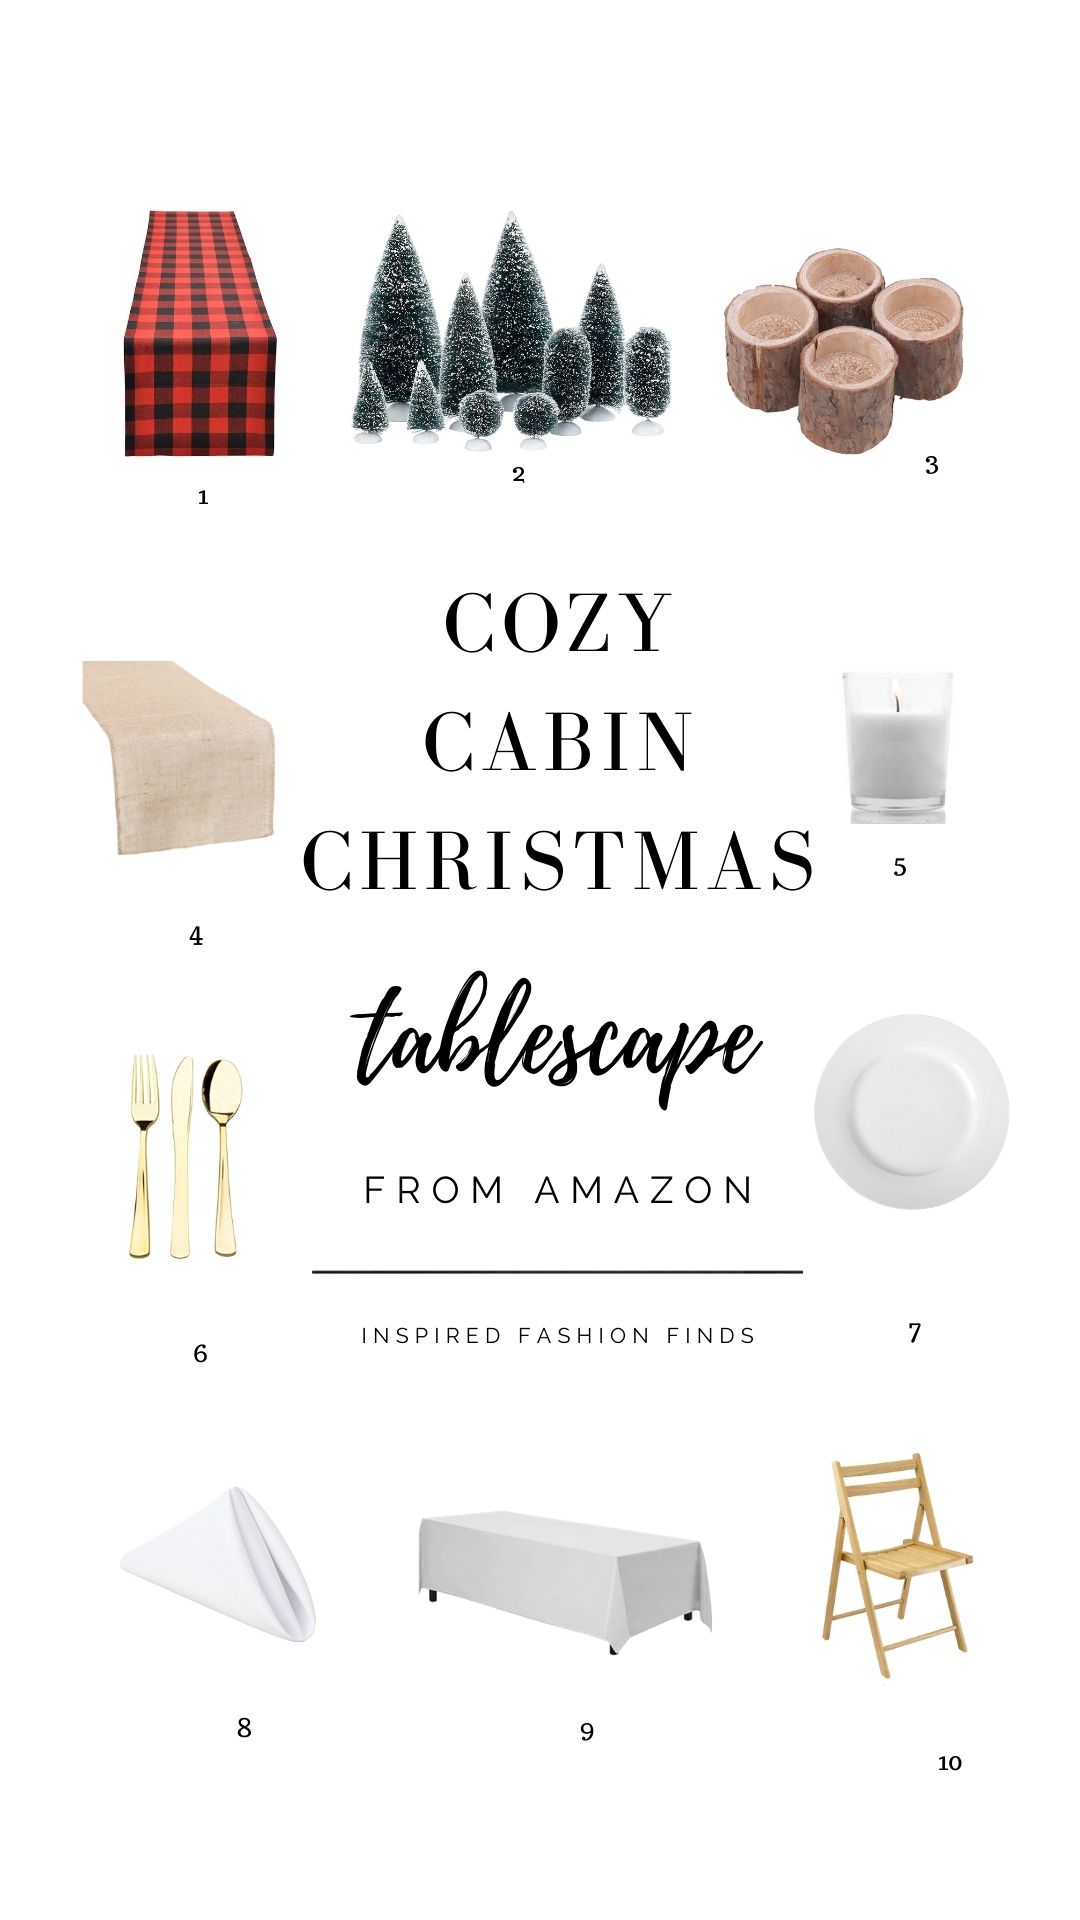 Holiday Decor-Cozy tablescape flannel cabin chrissy horton inspired fashion finds pinterest pin